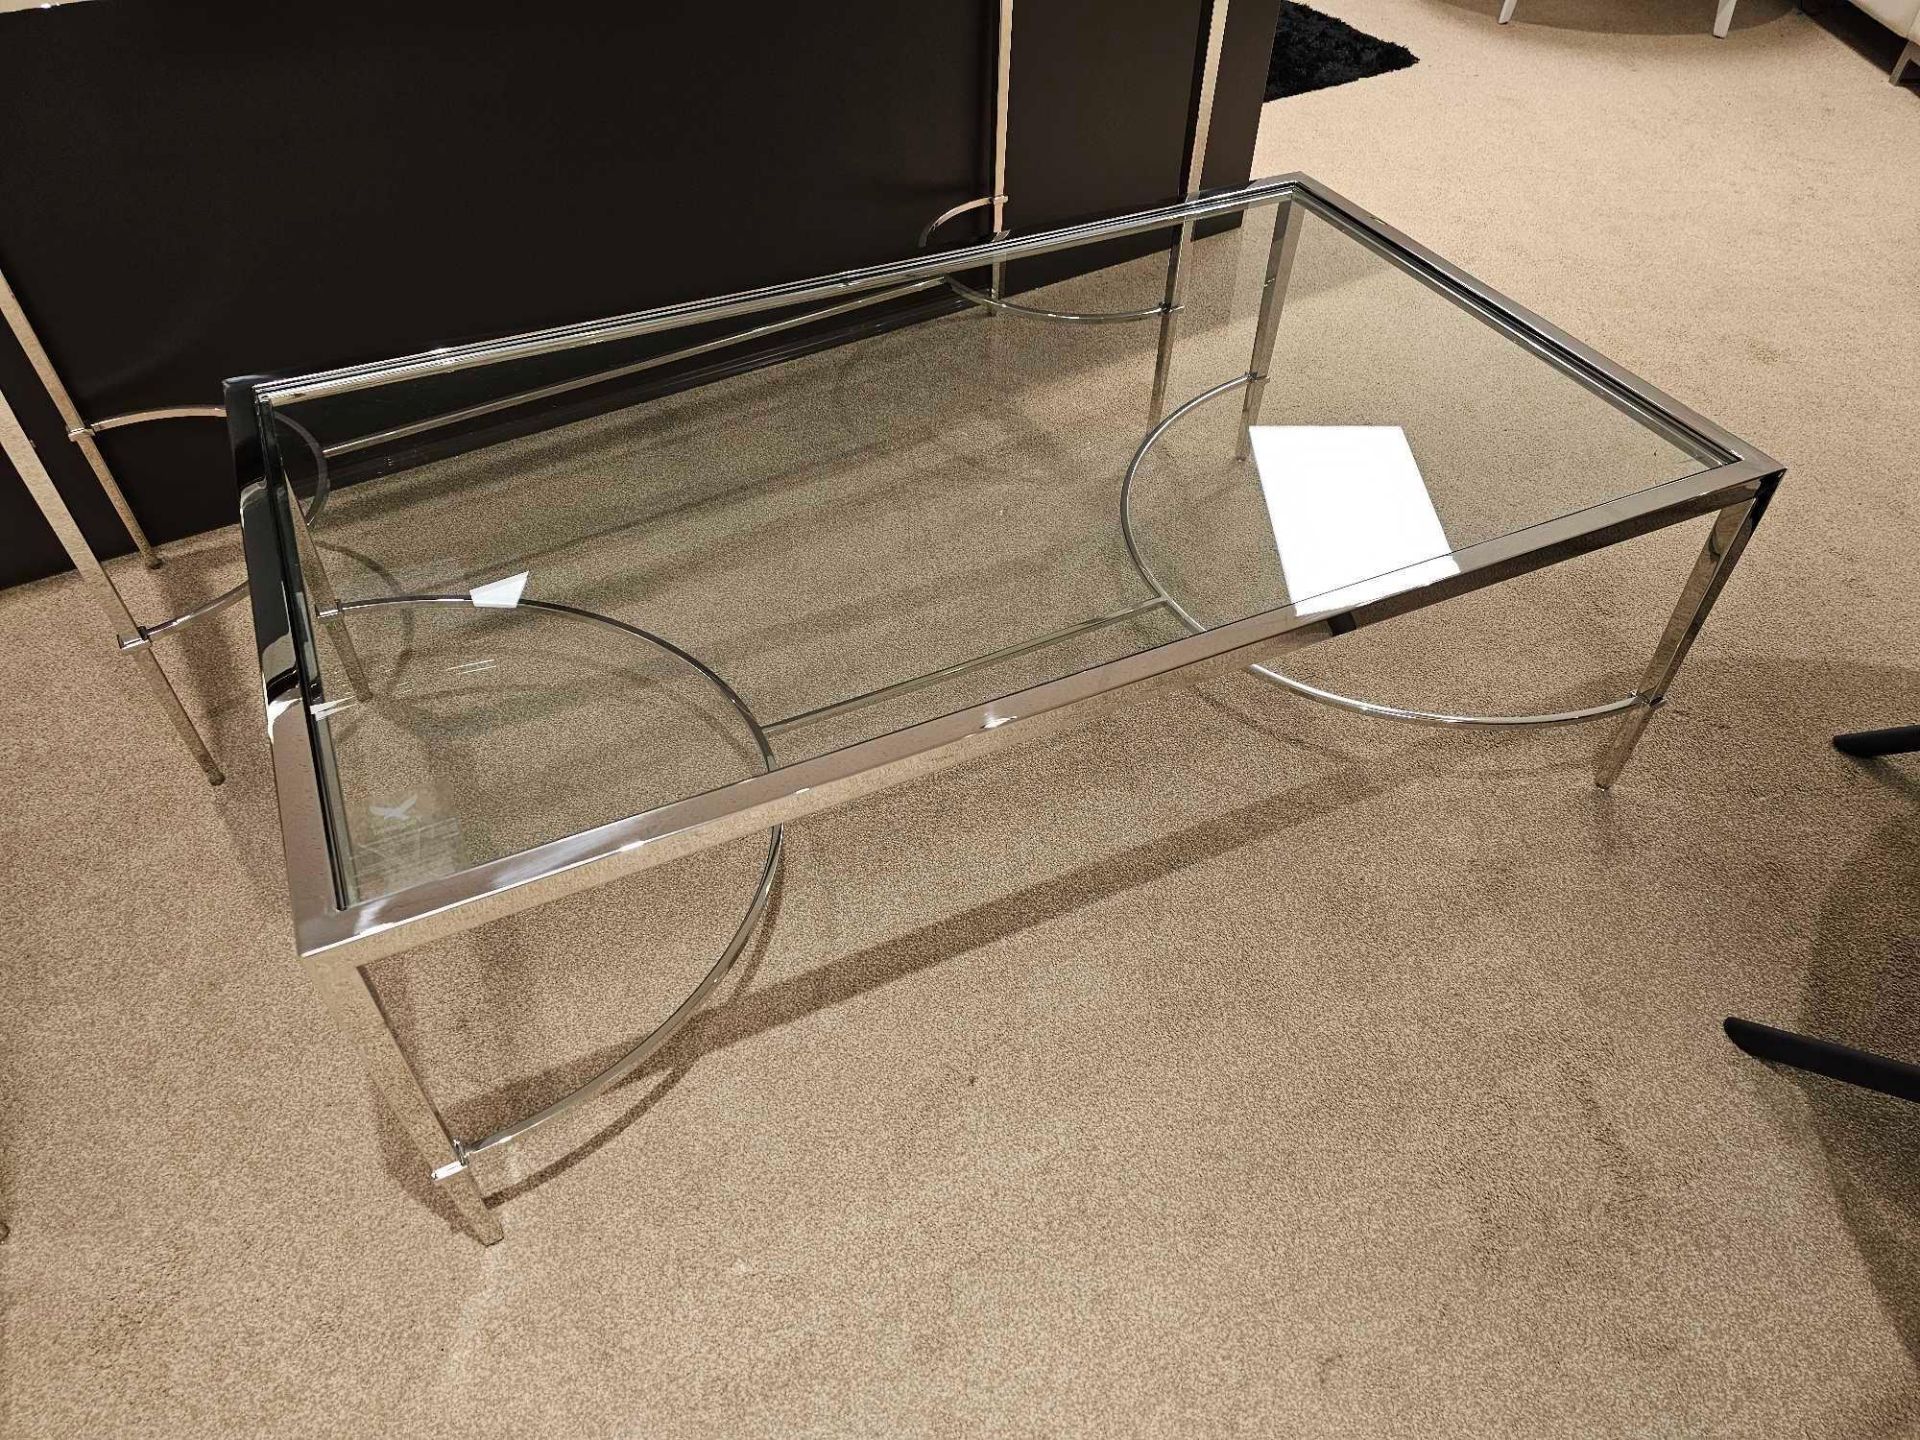 Tokyo Coffee Table by Kesterport The Tokyo coffee table with its clear glass top and a refined - Image 2 of 6